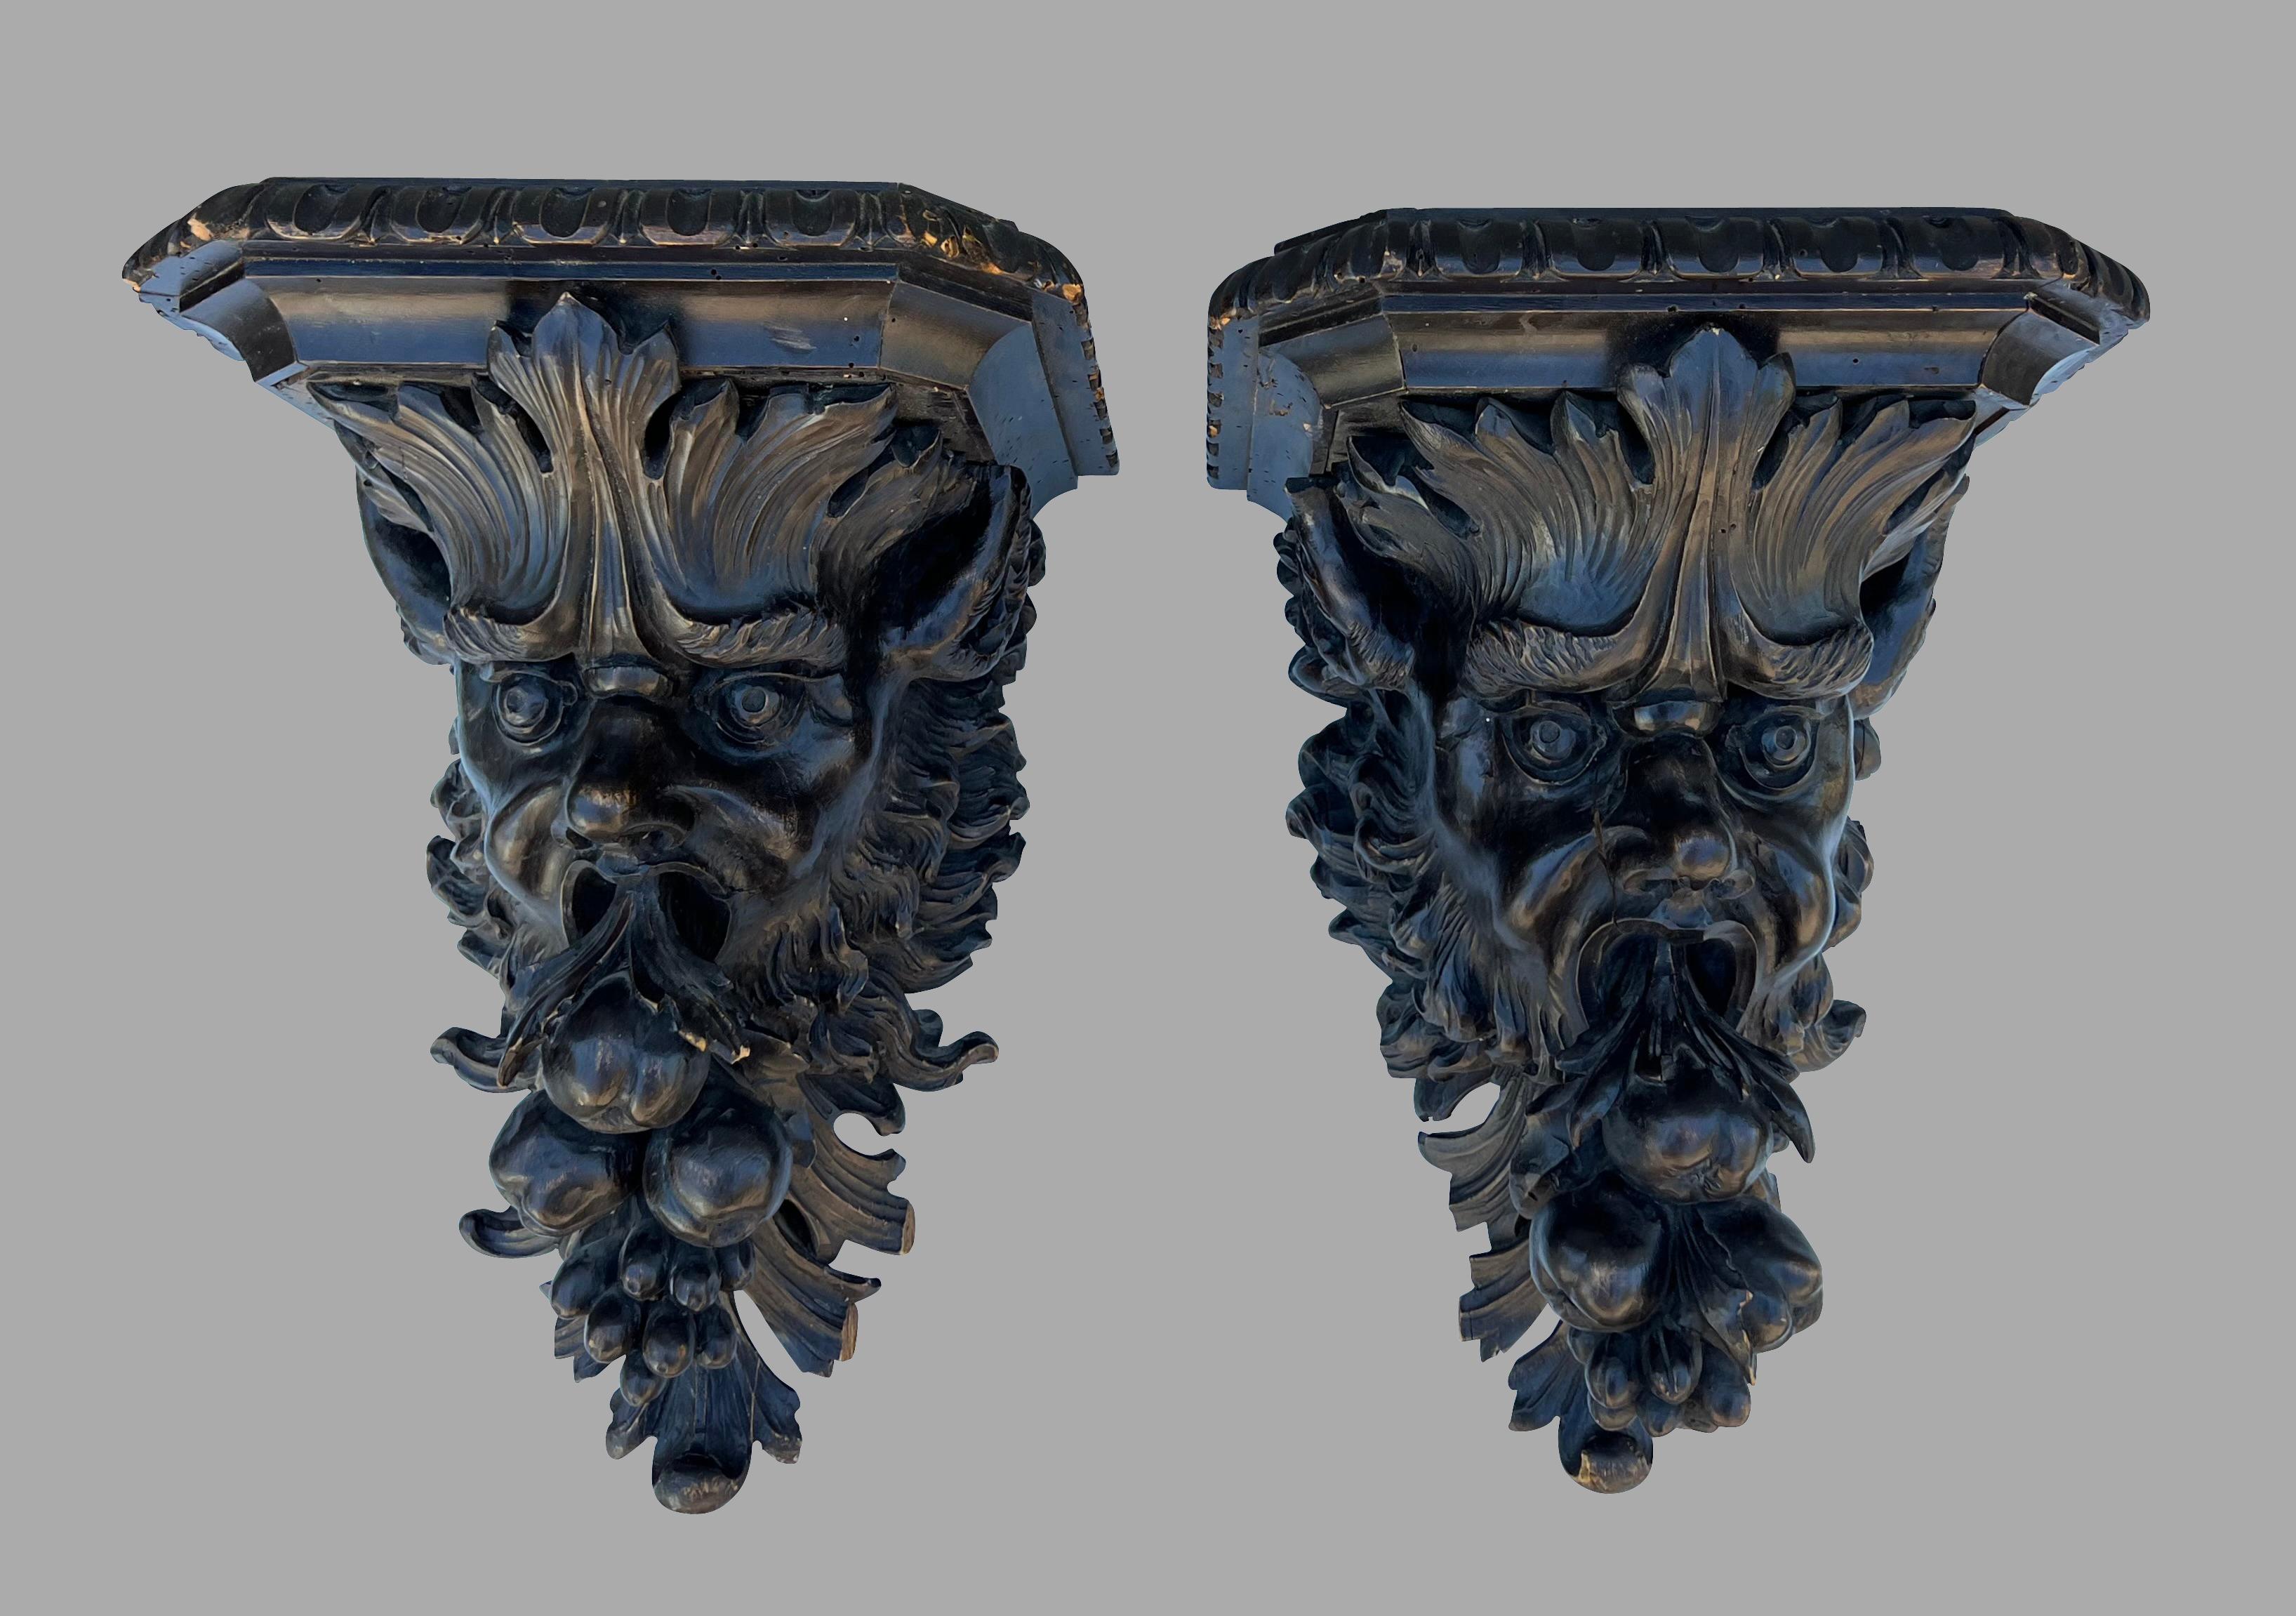 An exceptional highly carved pair of walnut wall brackets consisting of dramatic well-carved faces of mythological creatures with wide eyes, opened mouths and wild flowing hair. Substantial iis scale these are truly dramatic. Brackets such as this